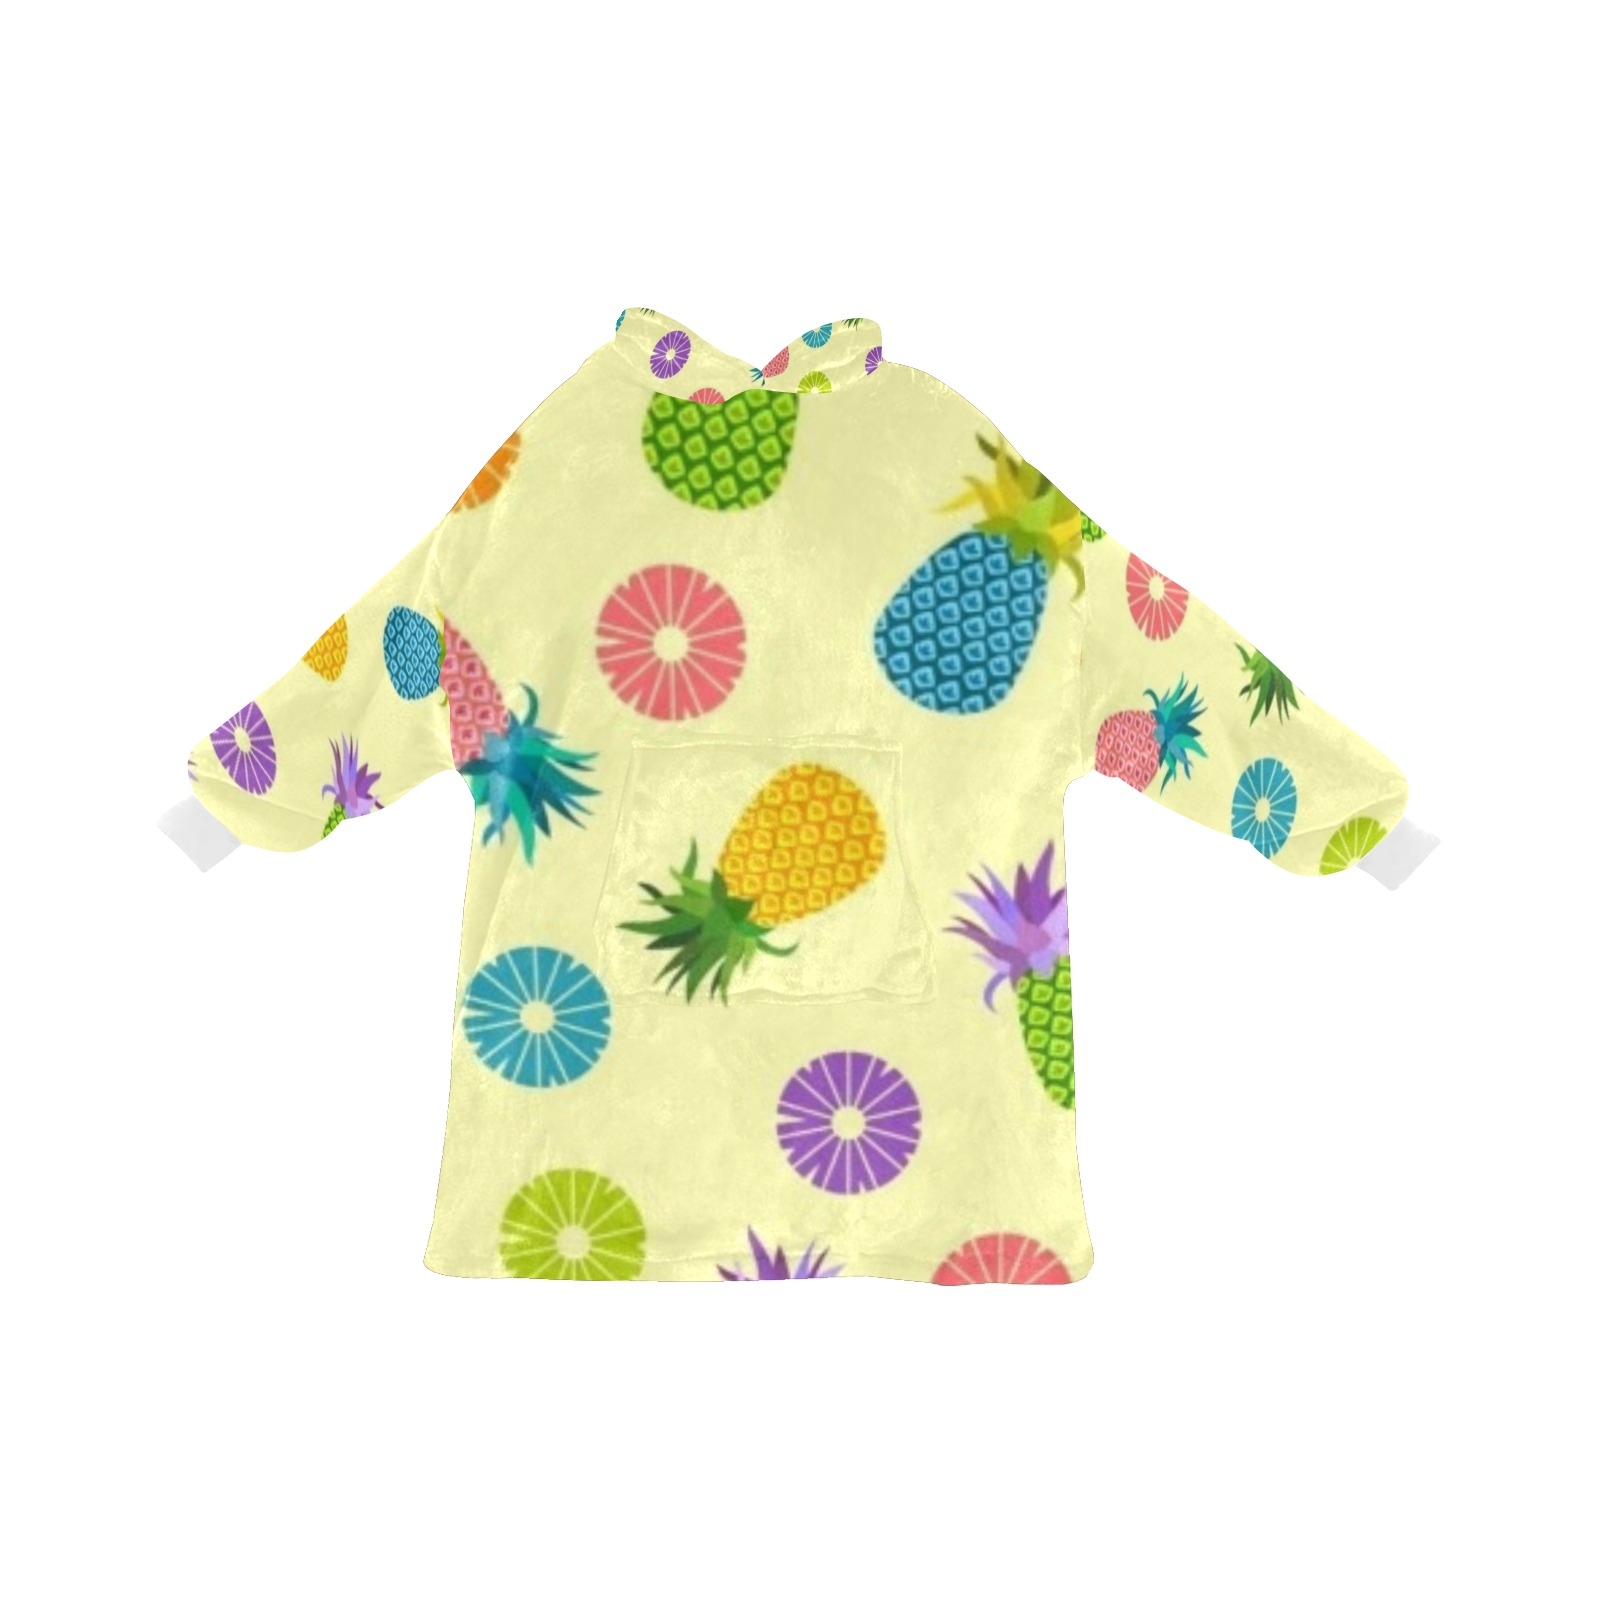 pineapple_background_multicolored_flat_decoration_6831771 Blanket Hoodie for Women